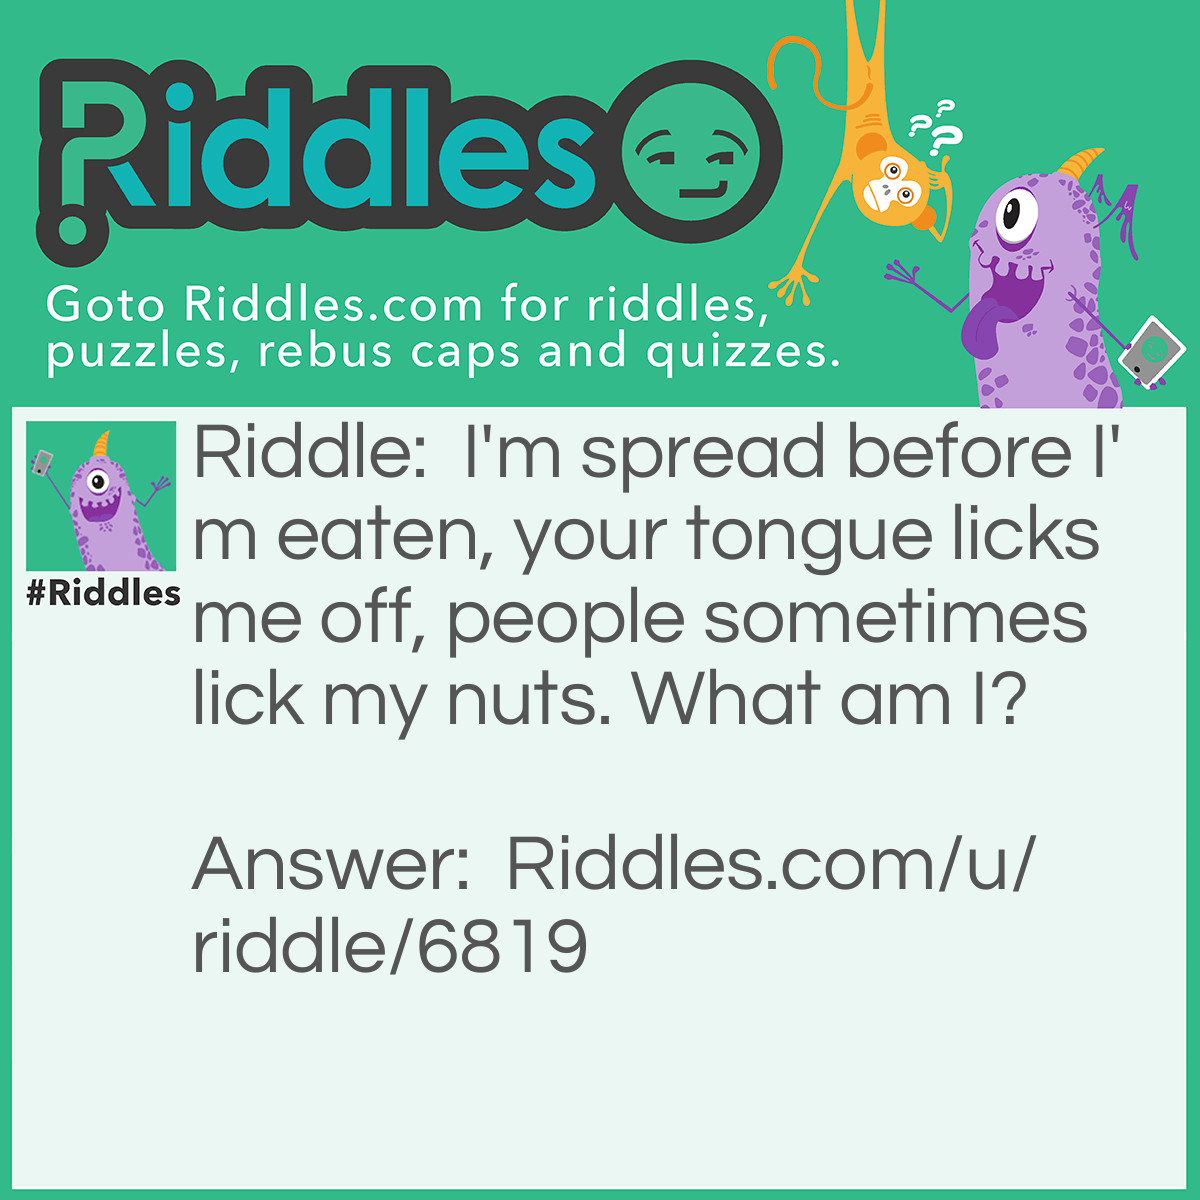 Riddle: I'm spread before I'm eaten, your tongue licks me off, people sometimes lick my nuts. What am I? Answer: Peanut butter.